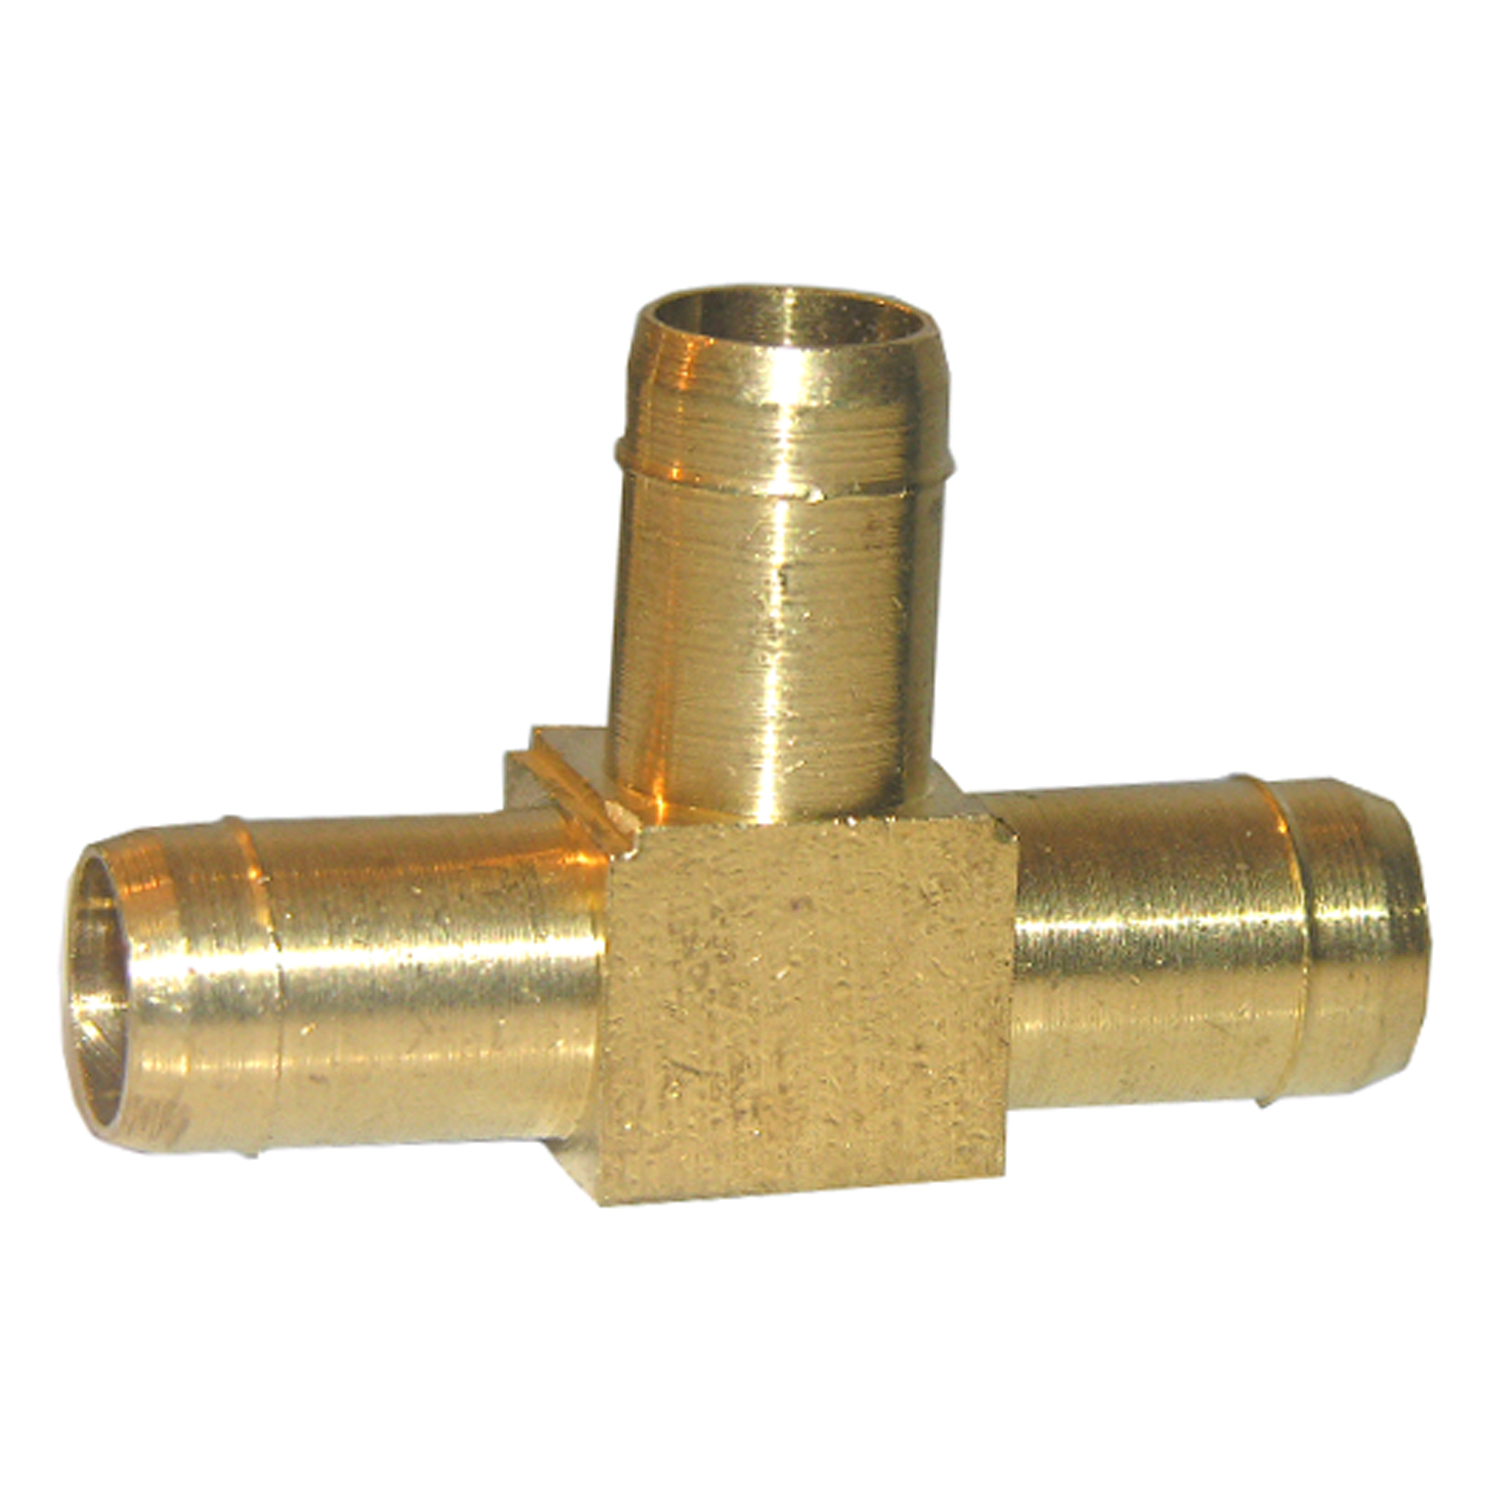 17-7405 Hose Tee, 3/8 in, Barb, Brass